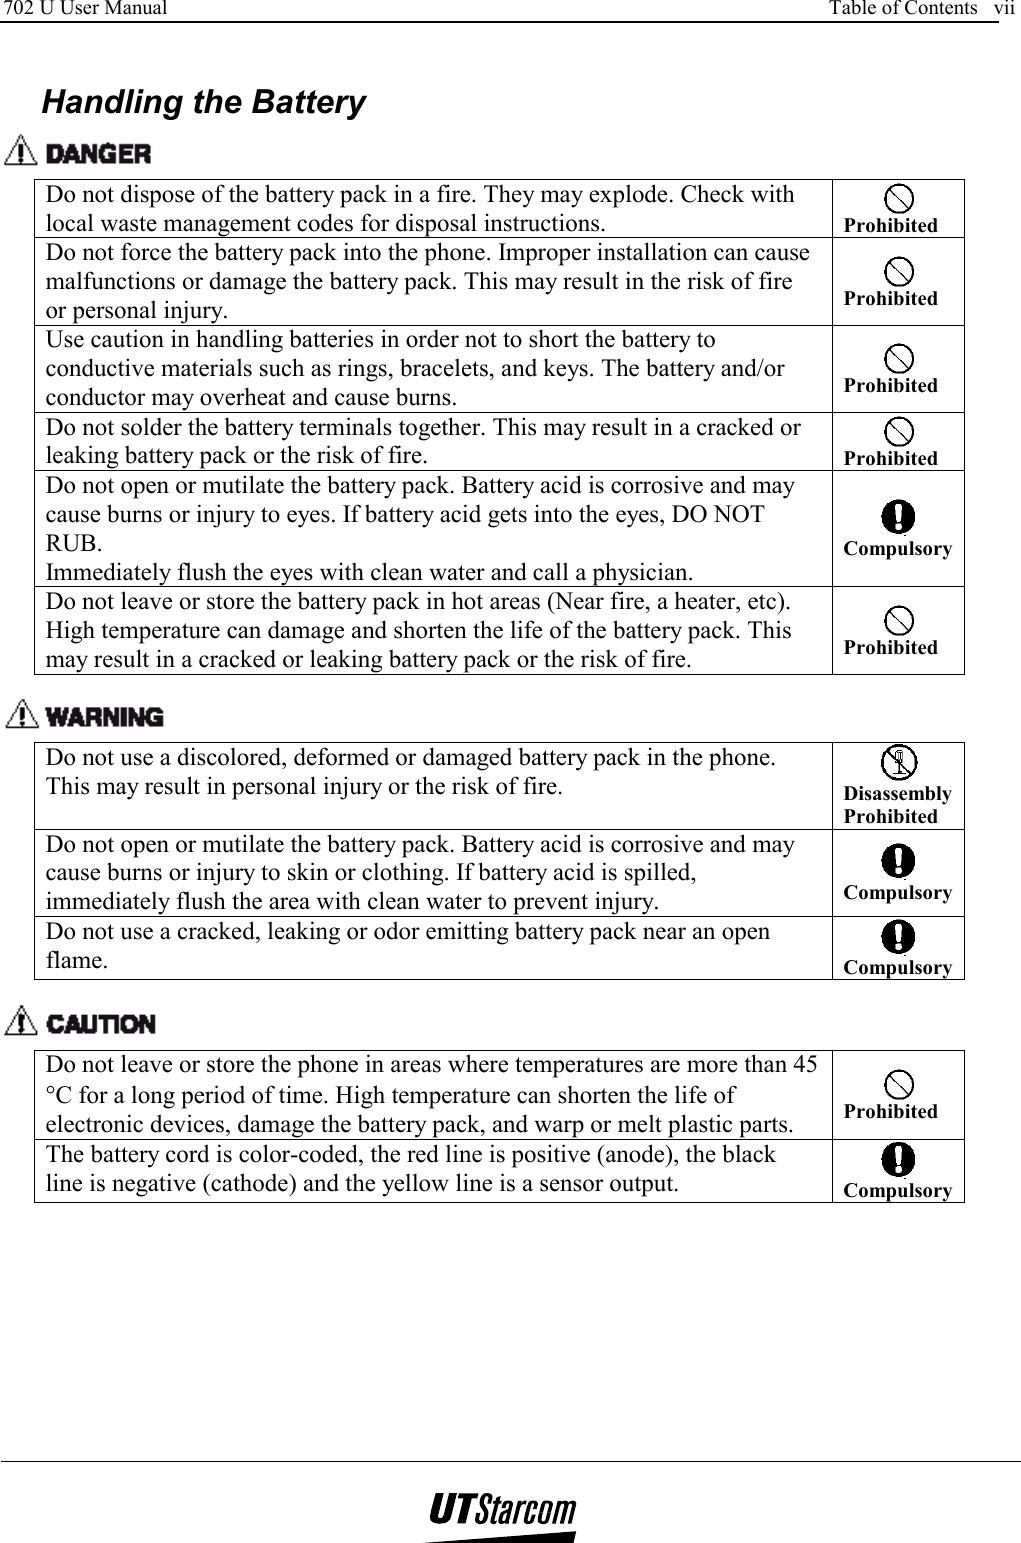 702 U User Manual      Table of Contents   vii      Handling the Battery  Do not dispose of the battery pack in a fire. They may explode. Check with local waste management codes for disposal instructions.   Prohibited Do not force the battery pack into the phone. Improper installation can cause malfunctions or damage the battery pack. This may result in the risk of fire or personal injury.  Prohibited Use caution in handling batteries in order not to short the battery to conductive materials such as rings, bracelets, and keys. The battery and/or conductor may overheat and cause burns.  Prohibited Do not solder the battery terminals together. This may result in a cracked or leaking battery pack or the risk of fire.   Prohibited Do not open or mutilate the battery pack. Battery acid is corrosive and may cause burns or injury to eyes. If battery acid gets into the eyes, DO NOT RUB. Immediately flush the eyes with clean water and call a physician.  CompulsoryDo not leave or store the battery pack in hot areas (Near fire, a heater, etc). High temperature can damage and shorten the life of the battery pack. This may result in a cracked or leaking battery pack or the risk of fire.  Prohibited   Do not use a discolored, deformed or damaged battery pack in the phone. This may result in personal injury or the risk of fire.   Disassembly Prohibited Do not open or mutilate the battery pack. Battery acid is corrosive and may cause burns or injury to skin or clothing. If battery acid is spilled, immediately flush the area with clean water to prevent injury.  Compulsory Do not use a cracked, leaking or odor emitting battery pack near an open flame.    Compulsory   Do not leave or store the phone in areas where temperatures are more than 45 °C for a long period of time. High temperature can shorten the life of electronic devices, damage the battery pack, and warp or melt plastic parts.  Prohibited The battery cord is color-coded, the red line is positive (anode), the black line is negative (cathode) and the yellow line is a sensor output.   Compulsory 